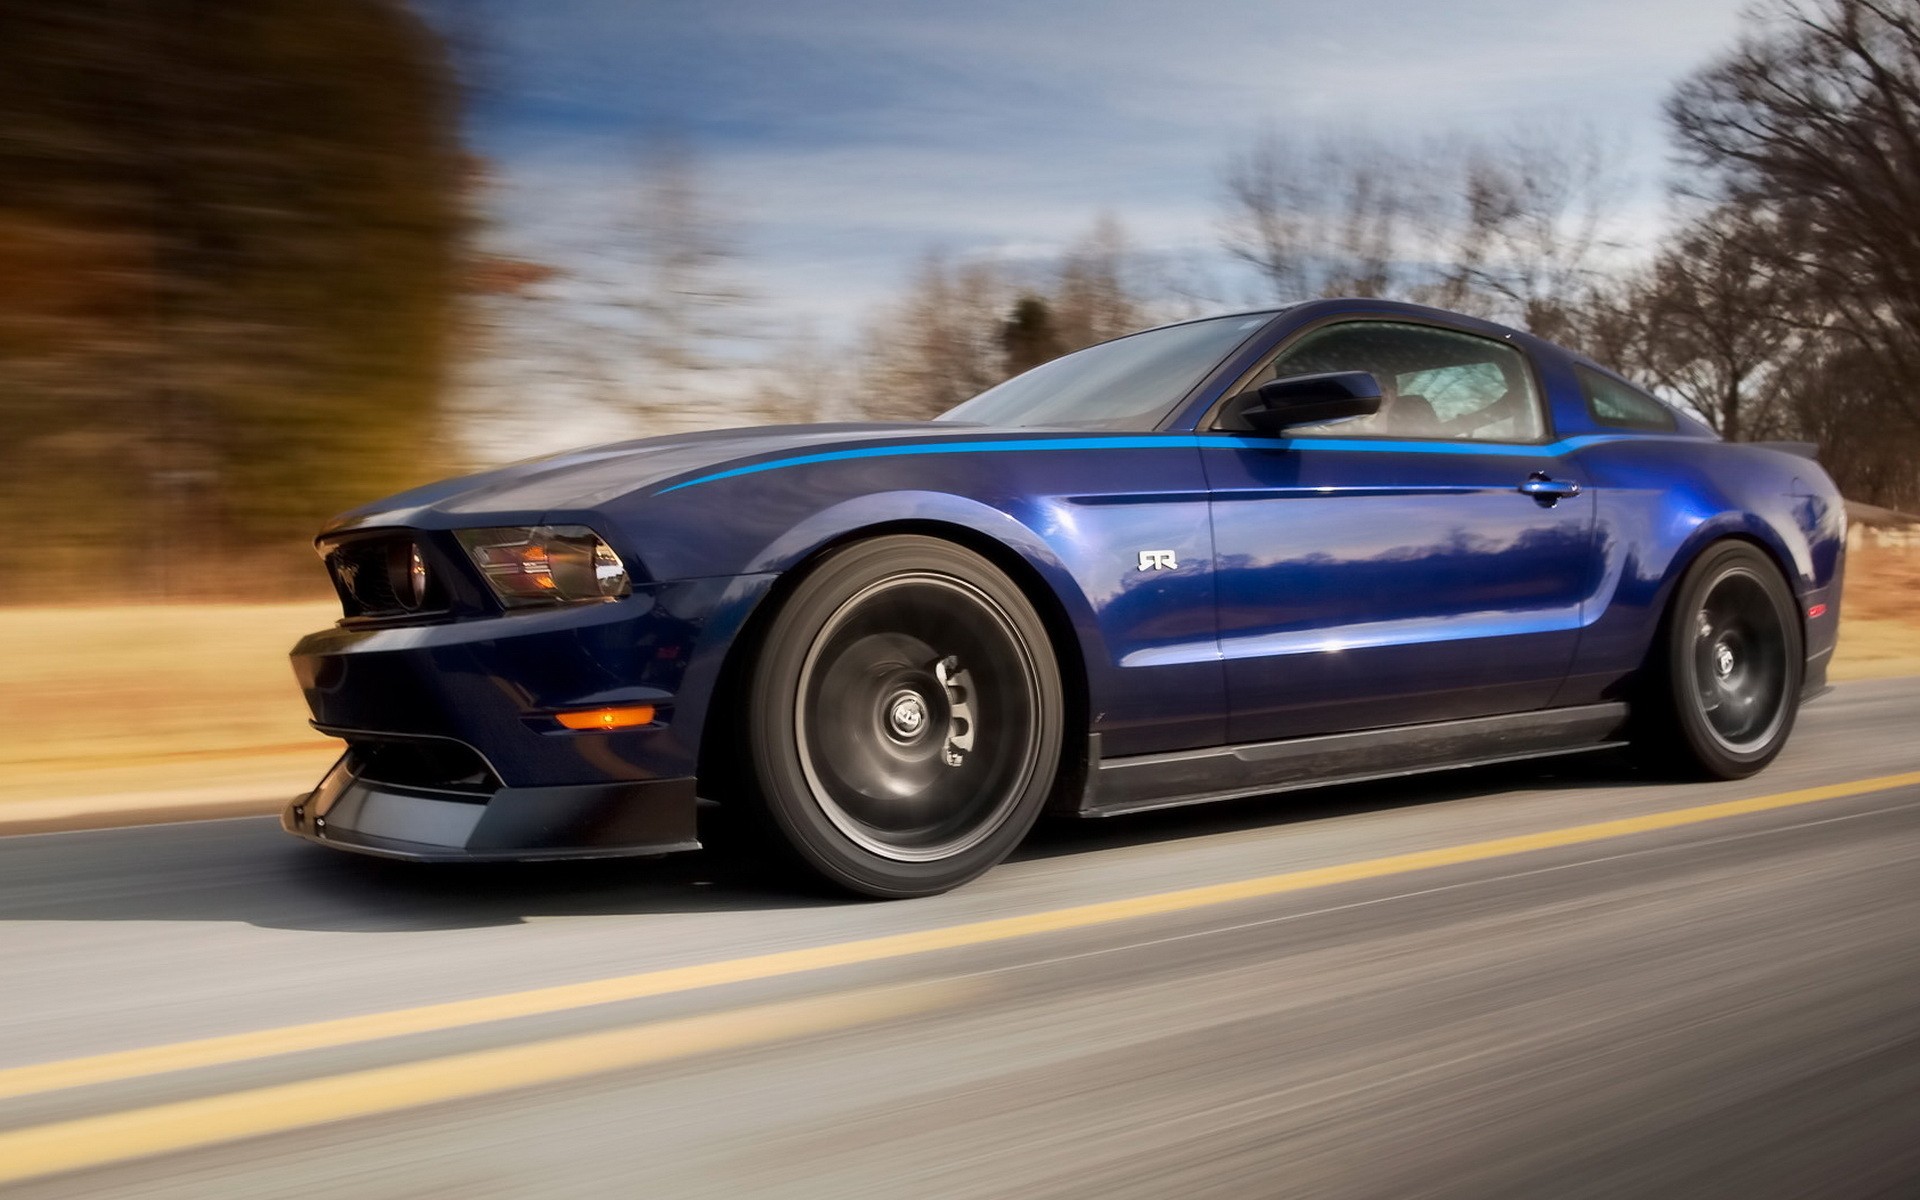 Ford Mustang Rtr Wallpaper HD